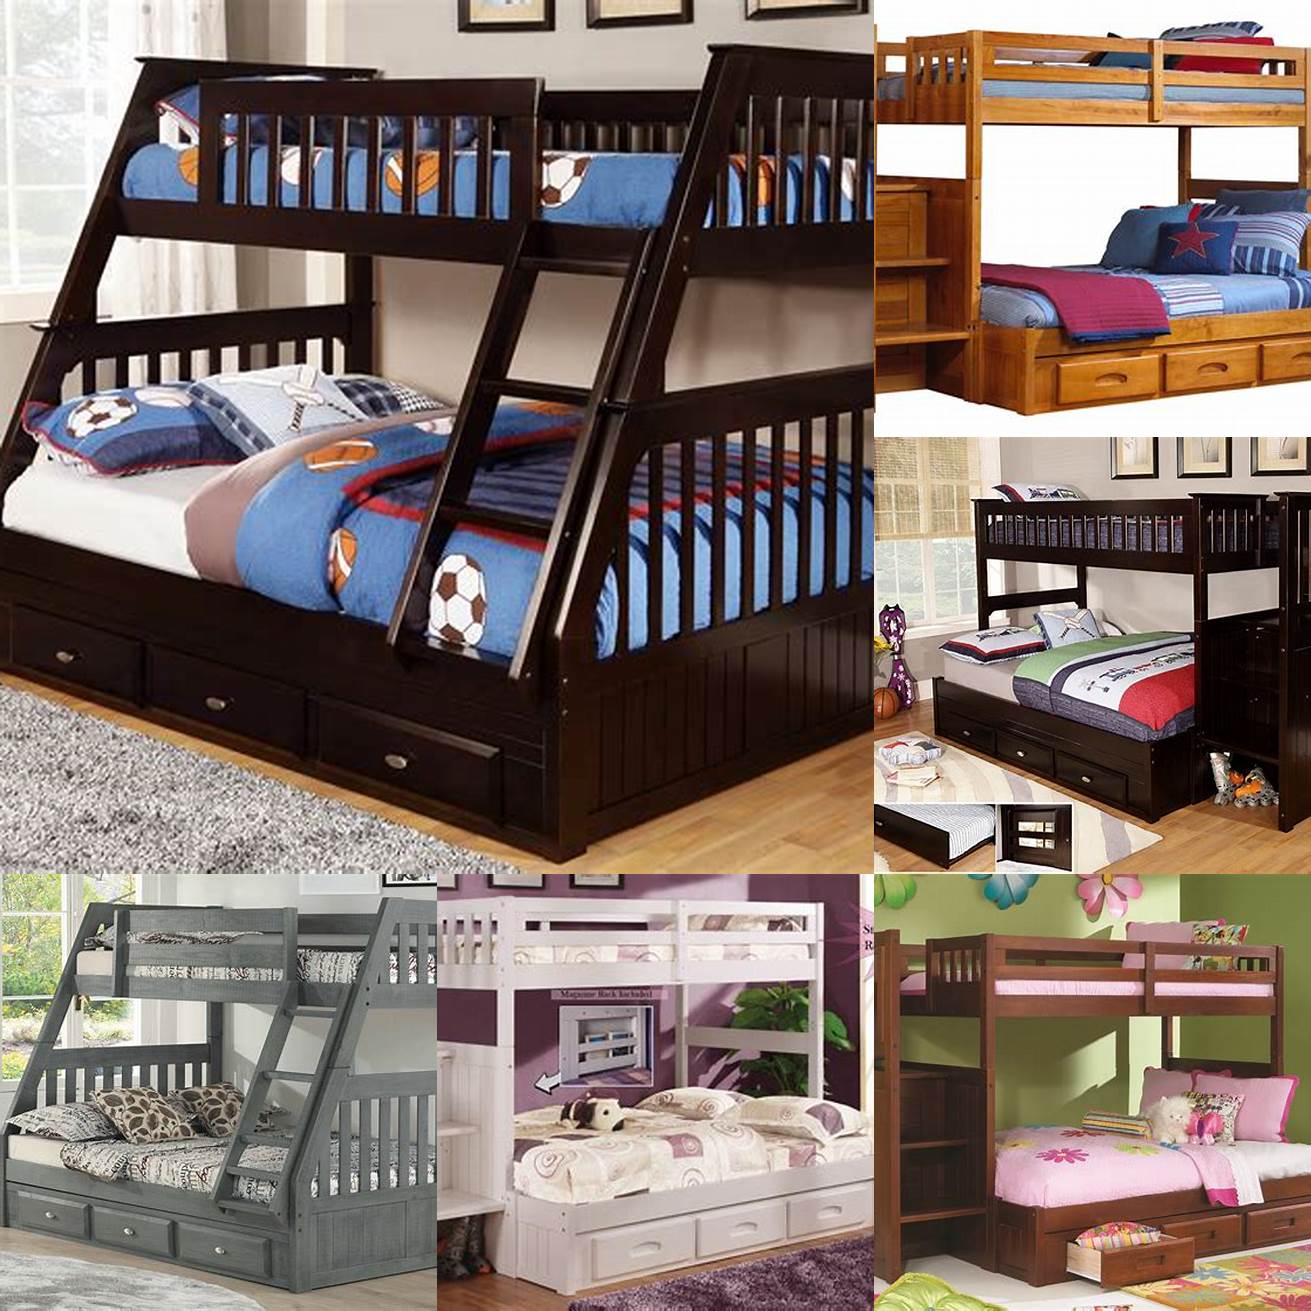 3 Discovery World Furniture Twin Over Full Staircase Bunk Bed This bunk bed comes with built-in stairs for safety and storage options